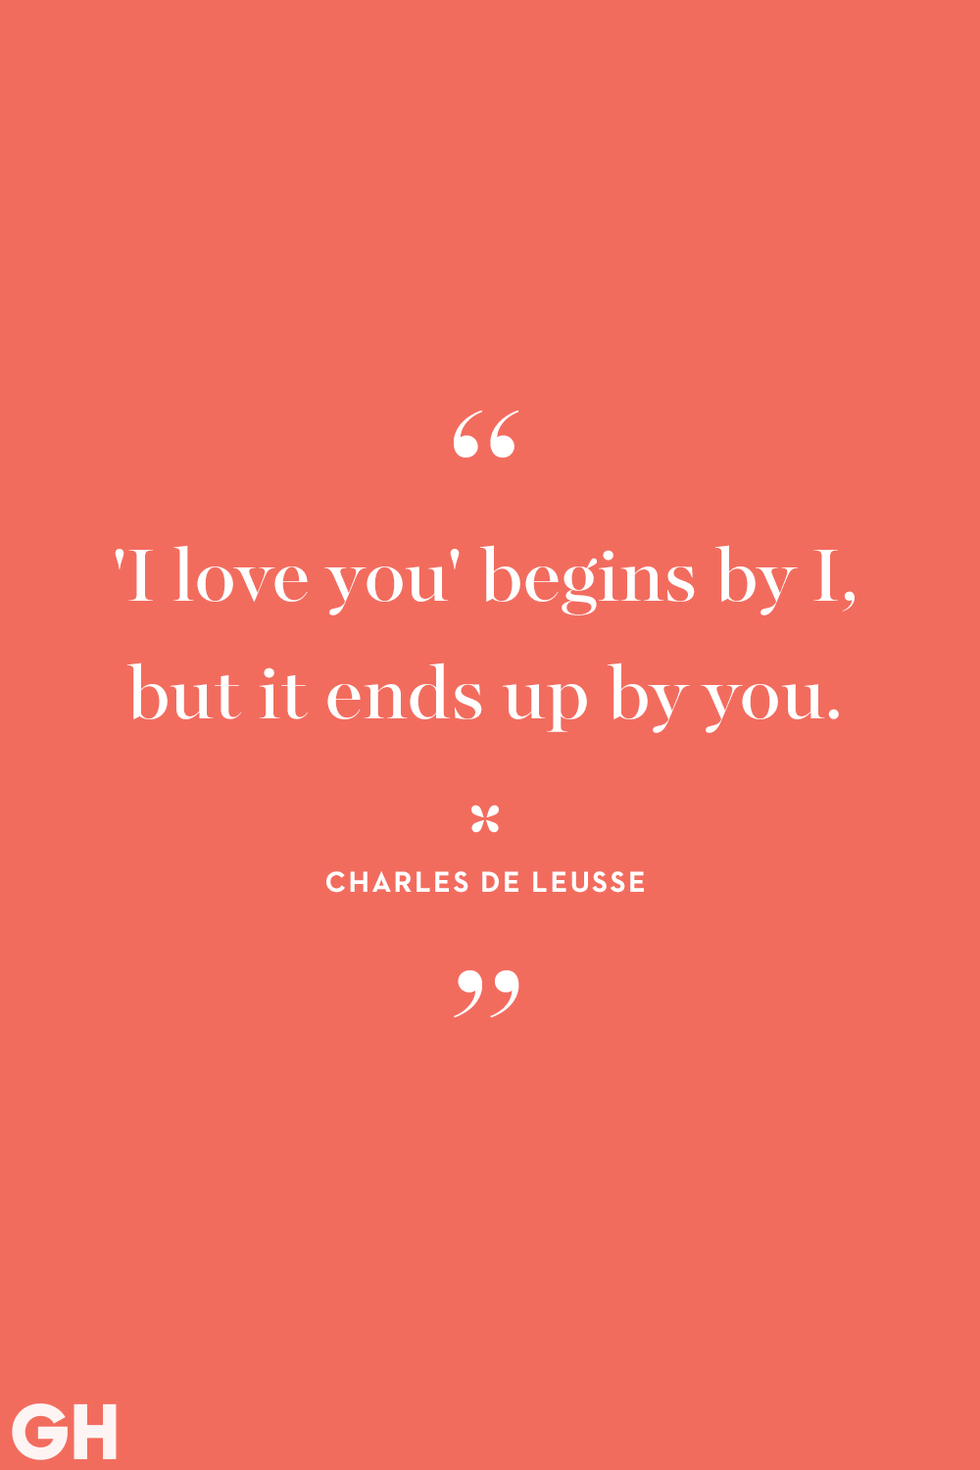 love quotes for her